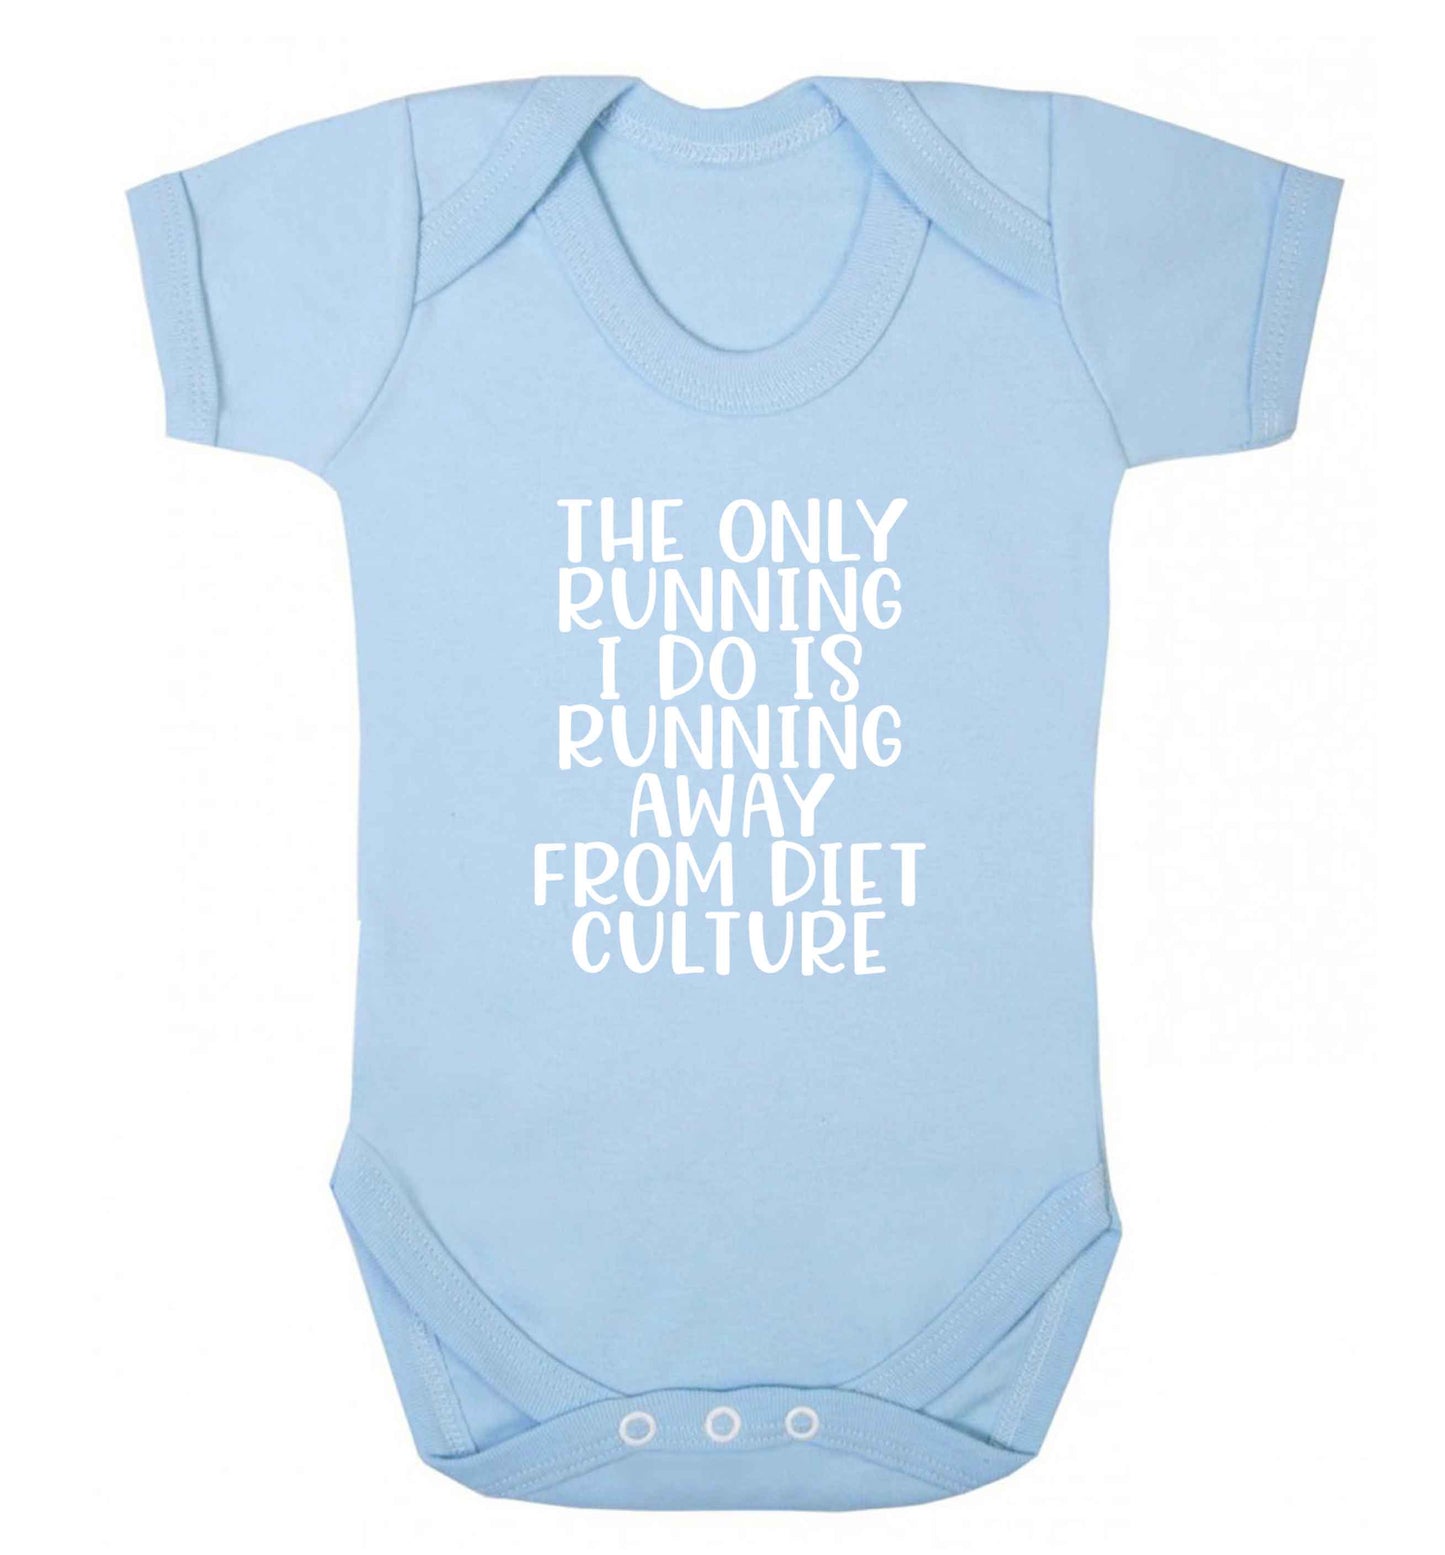 The only running I do is running away from diet culture baby vest pale blue 18-24 months